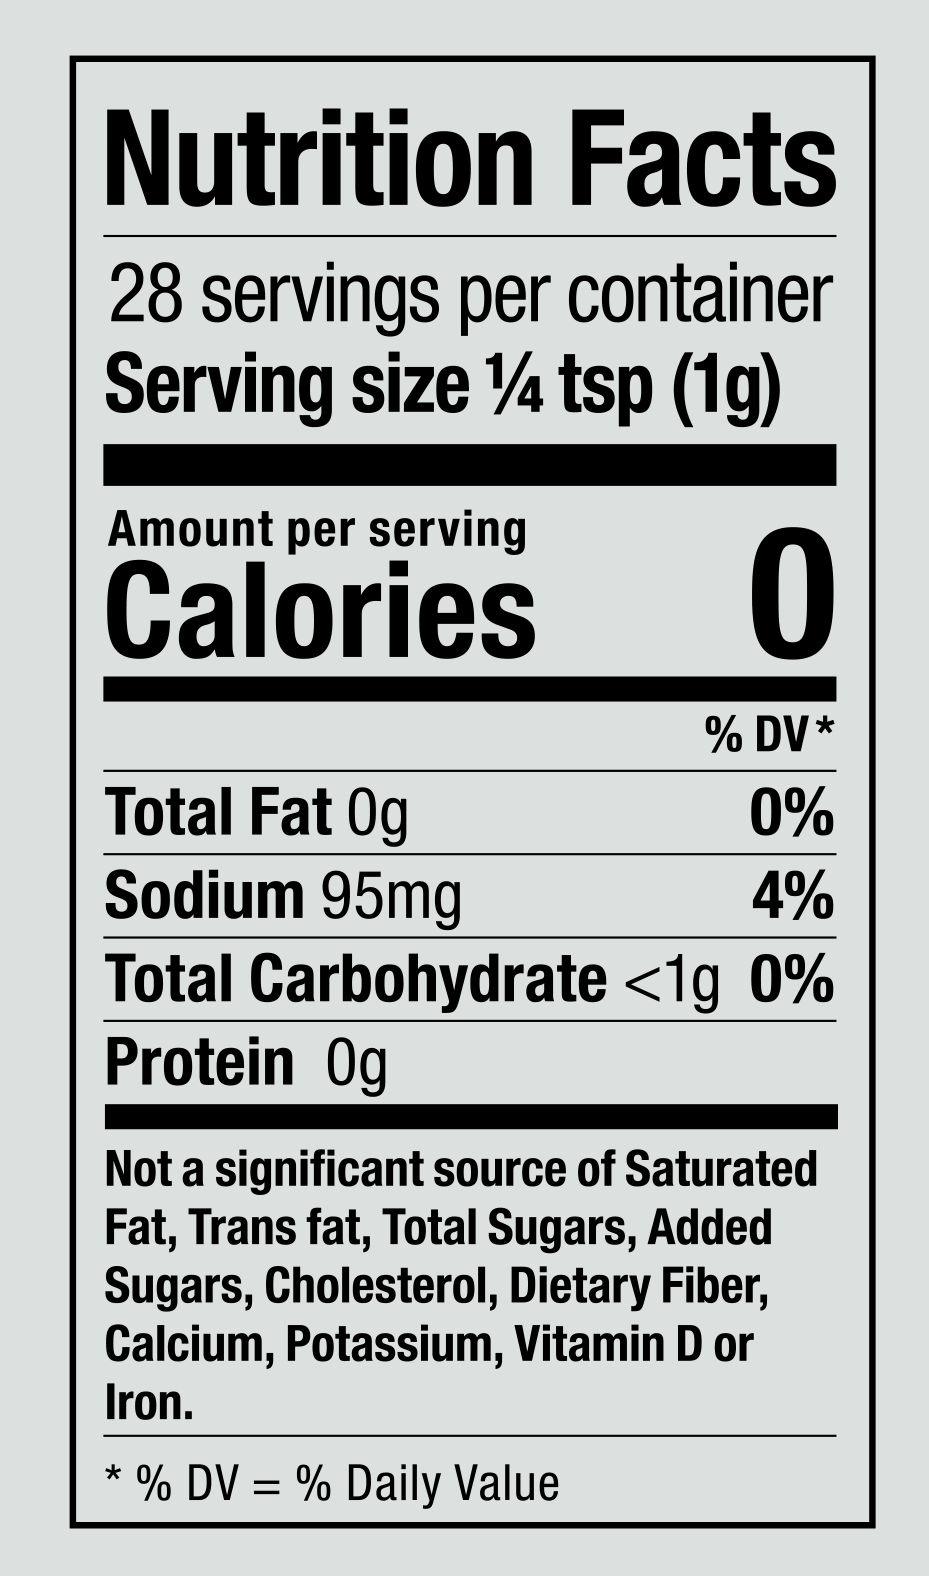 nutrition facts. Please call 501-327-2182 for more information.